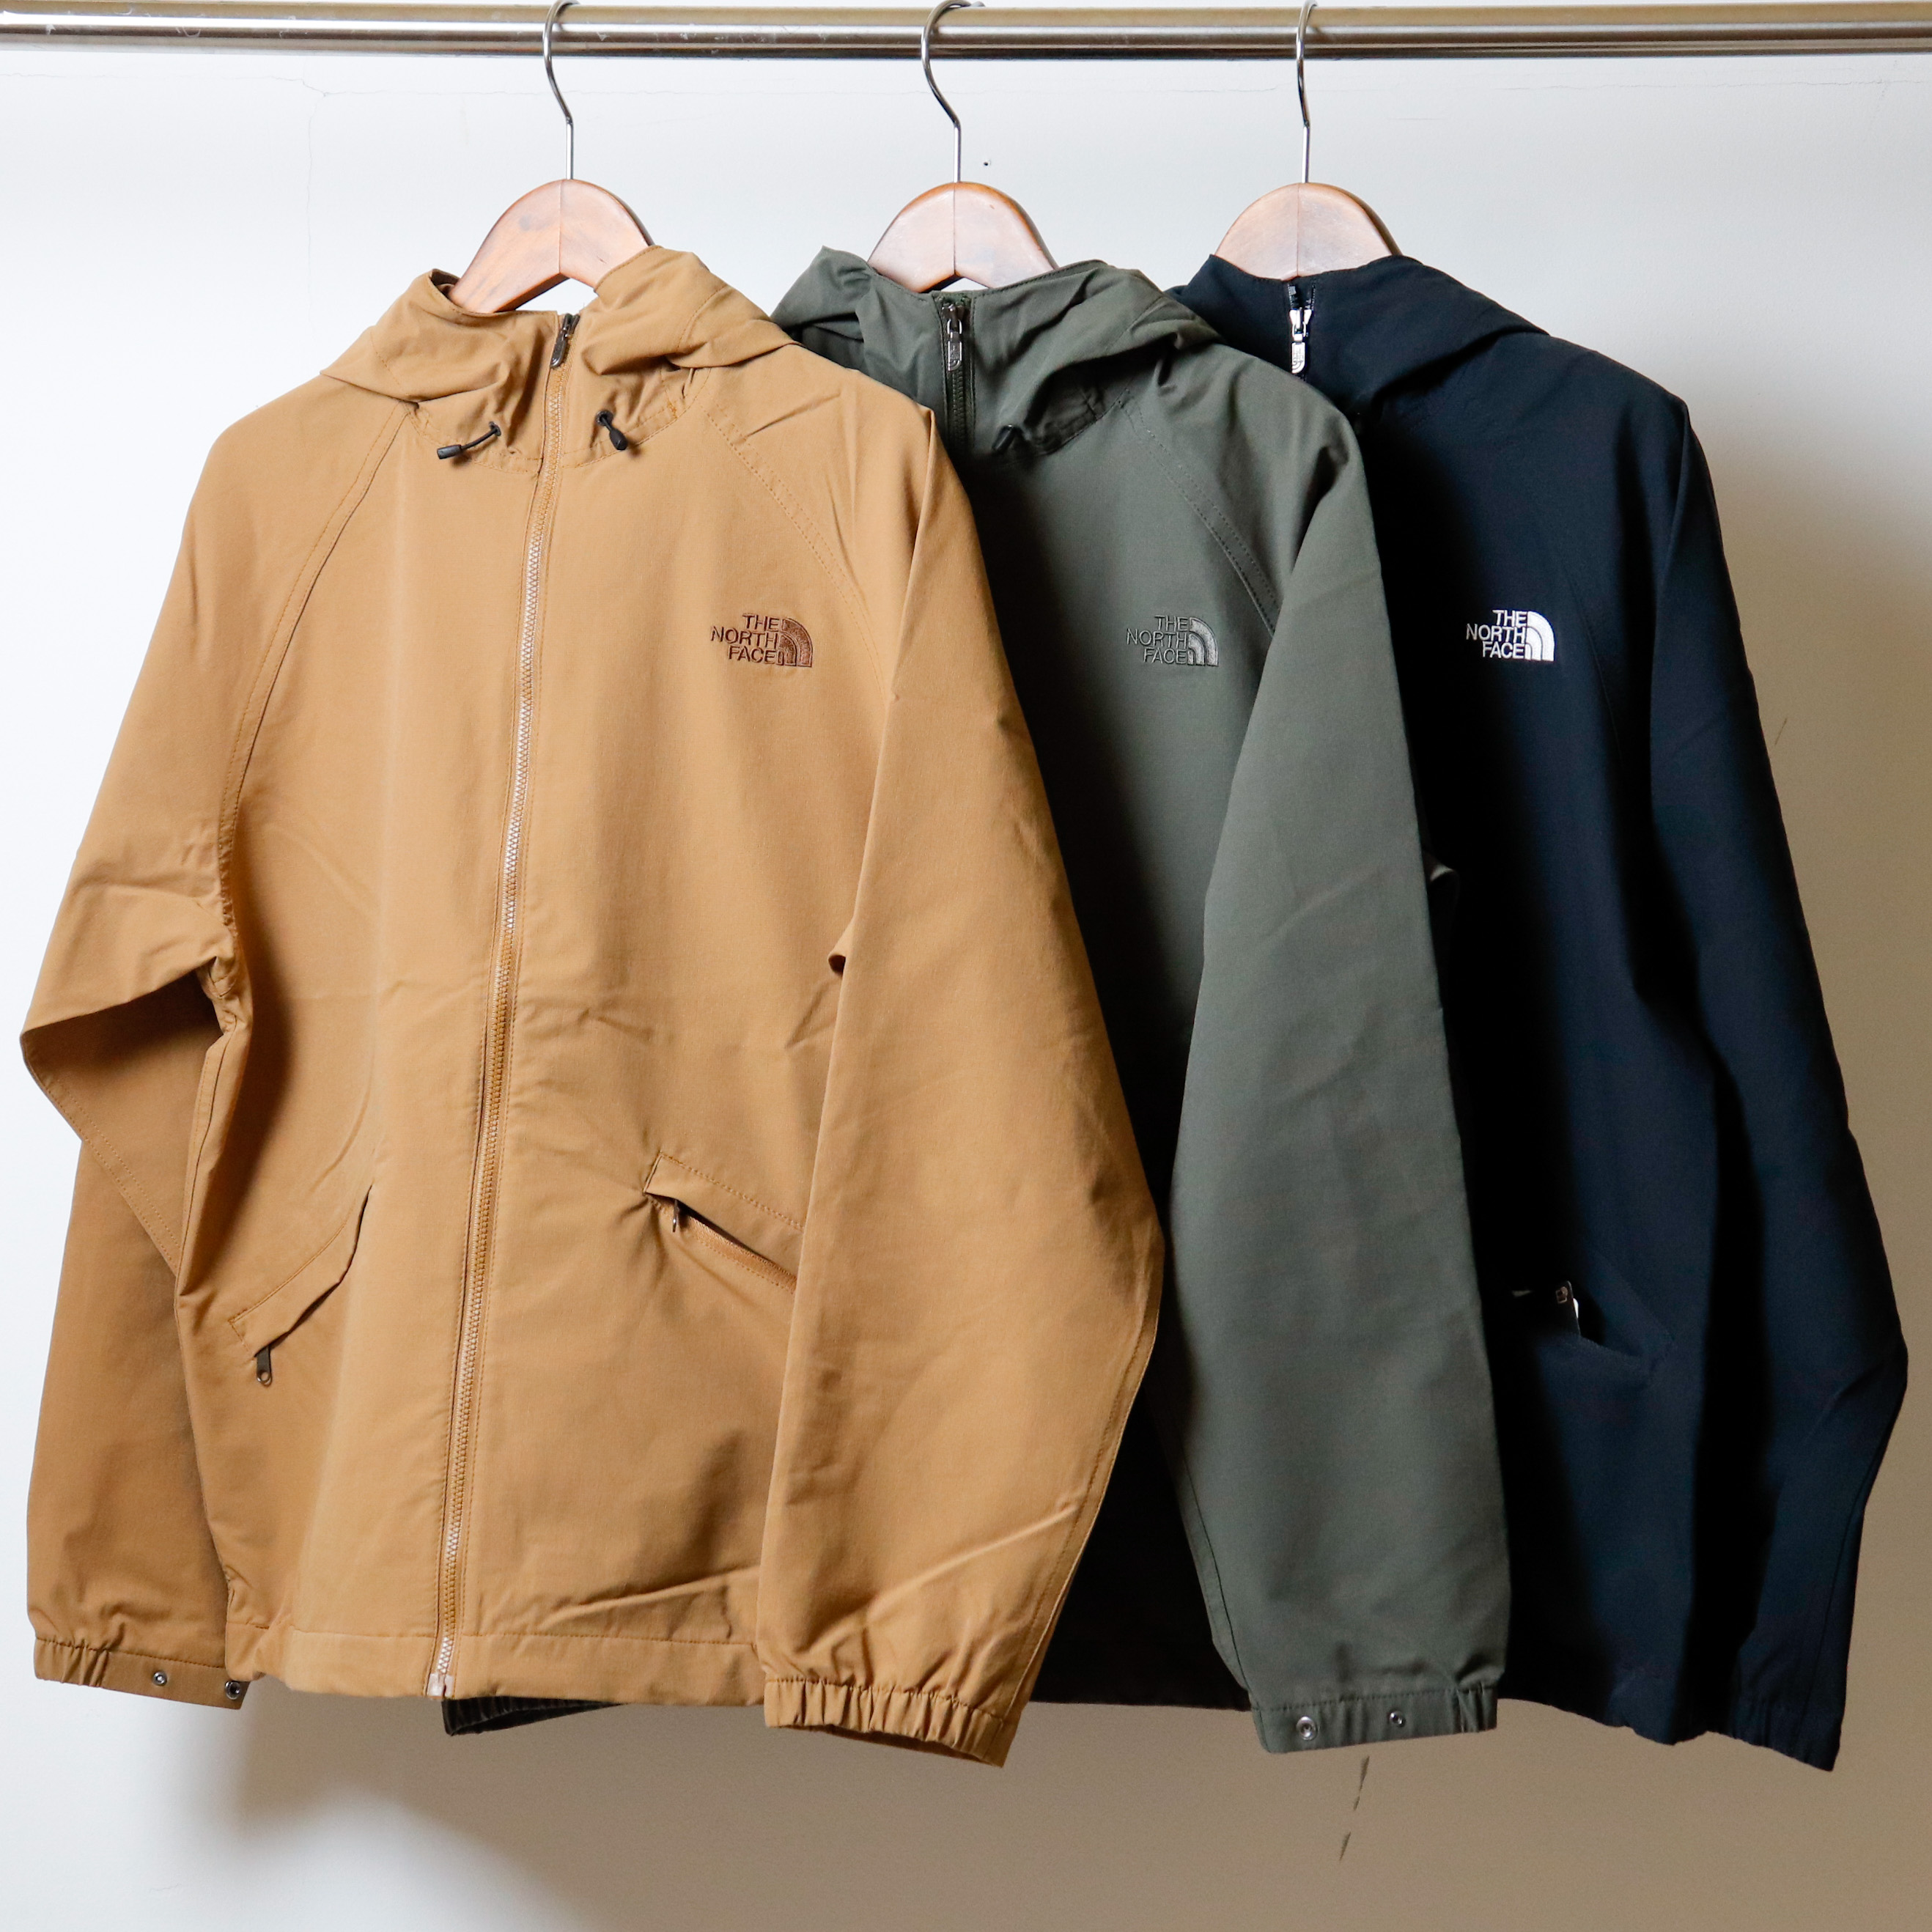 Women's】初夏に。〜『THE NORTH FACE』NEW ARRIVAL〜 | BLUEBEAT ONLINE